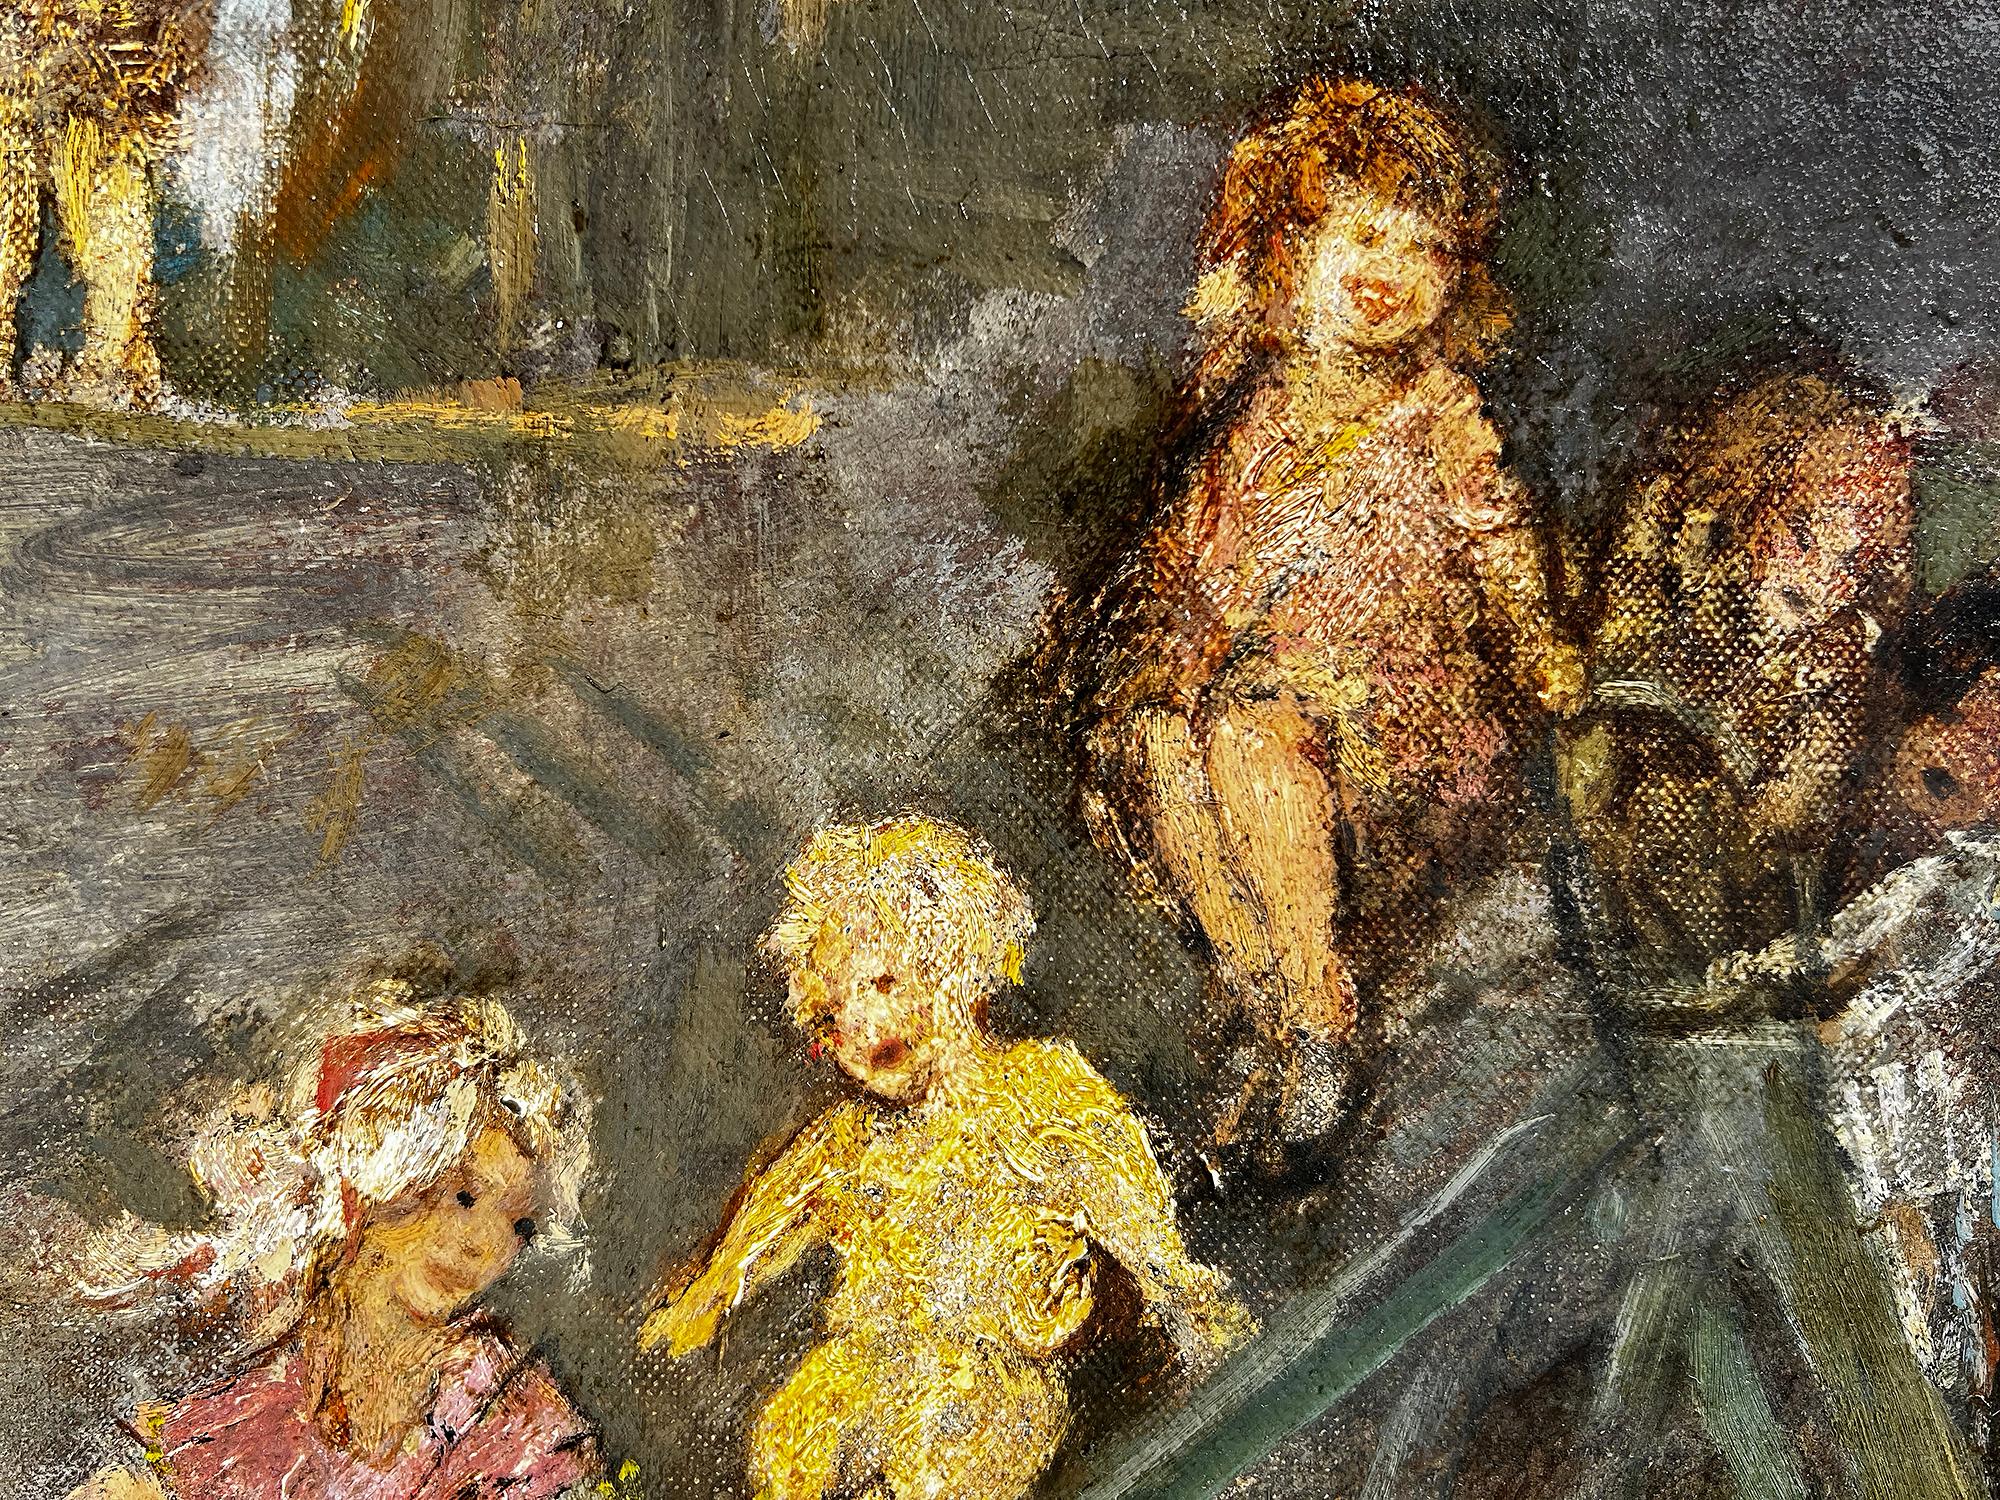 Immigrant children from New York's Lower East Side are joyfully captured whizzing down on a slide.  From the window of a tenement building, a lone adult with child witnesses the folic and fun.  Myers spent a good deal of his time depicting the